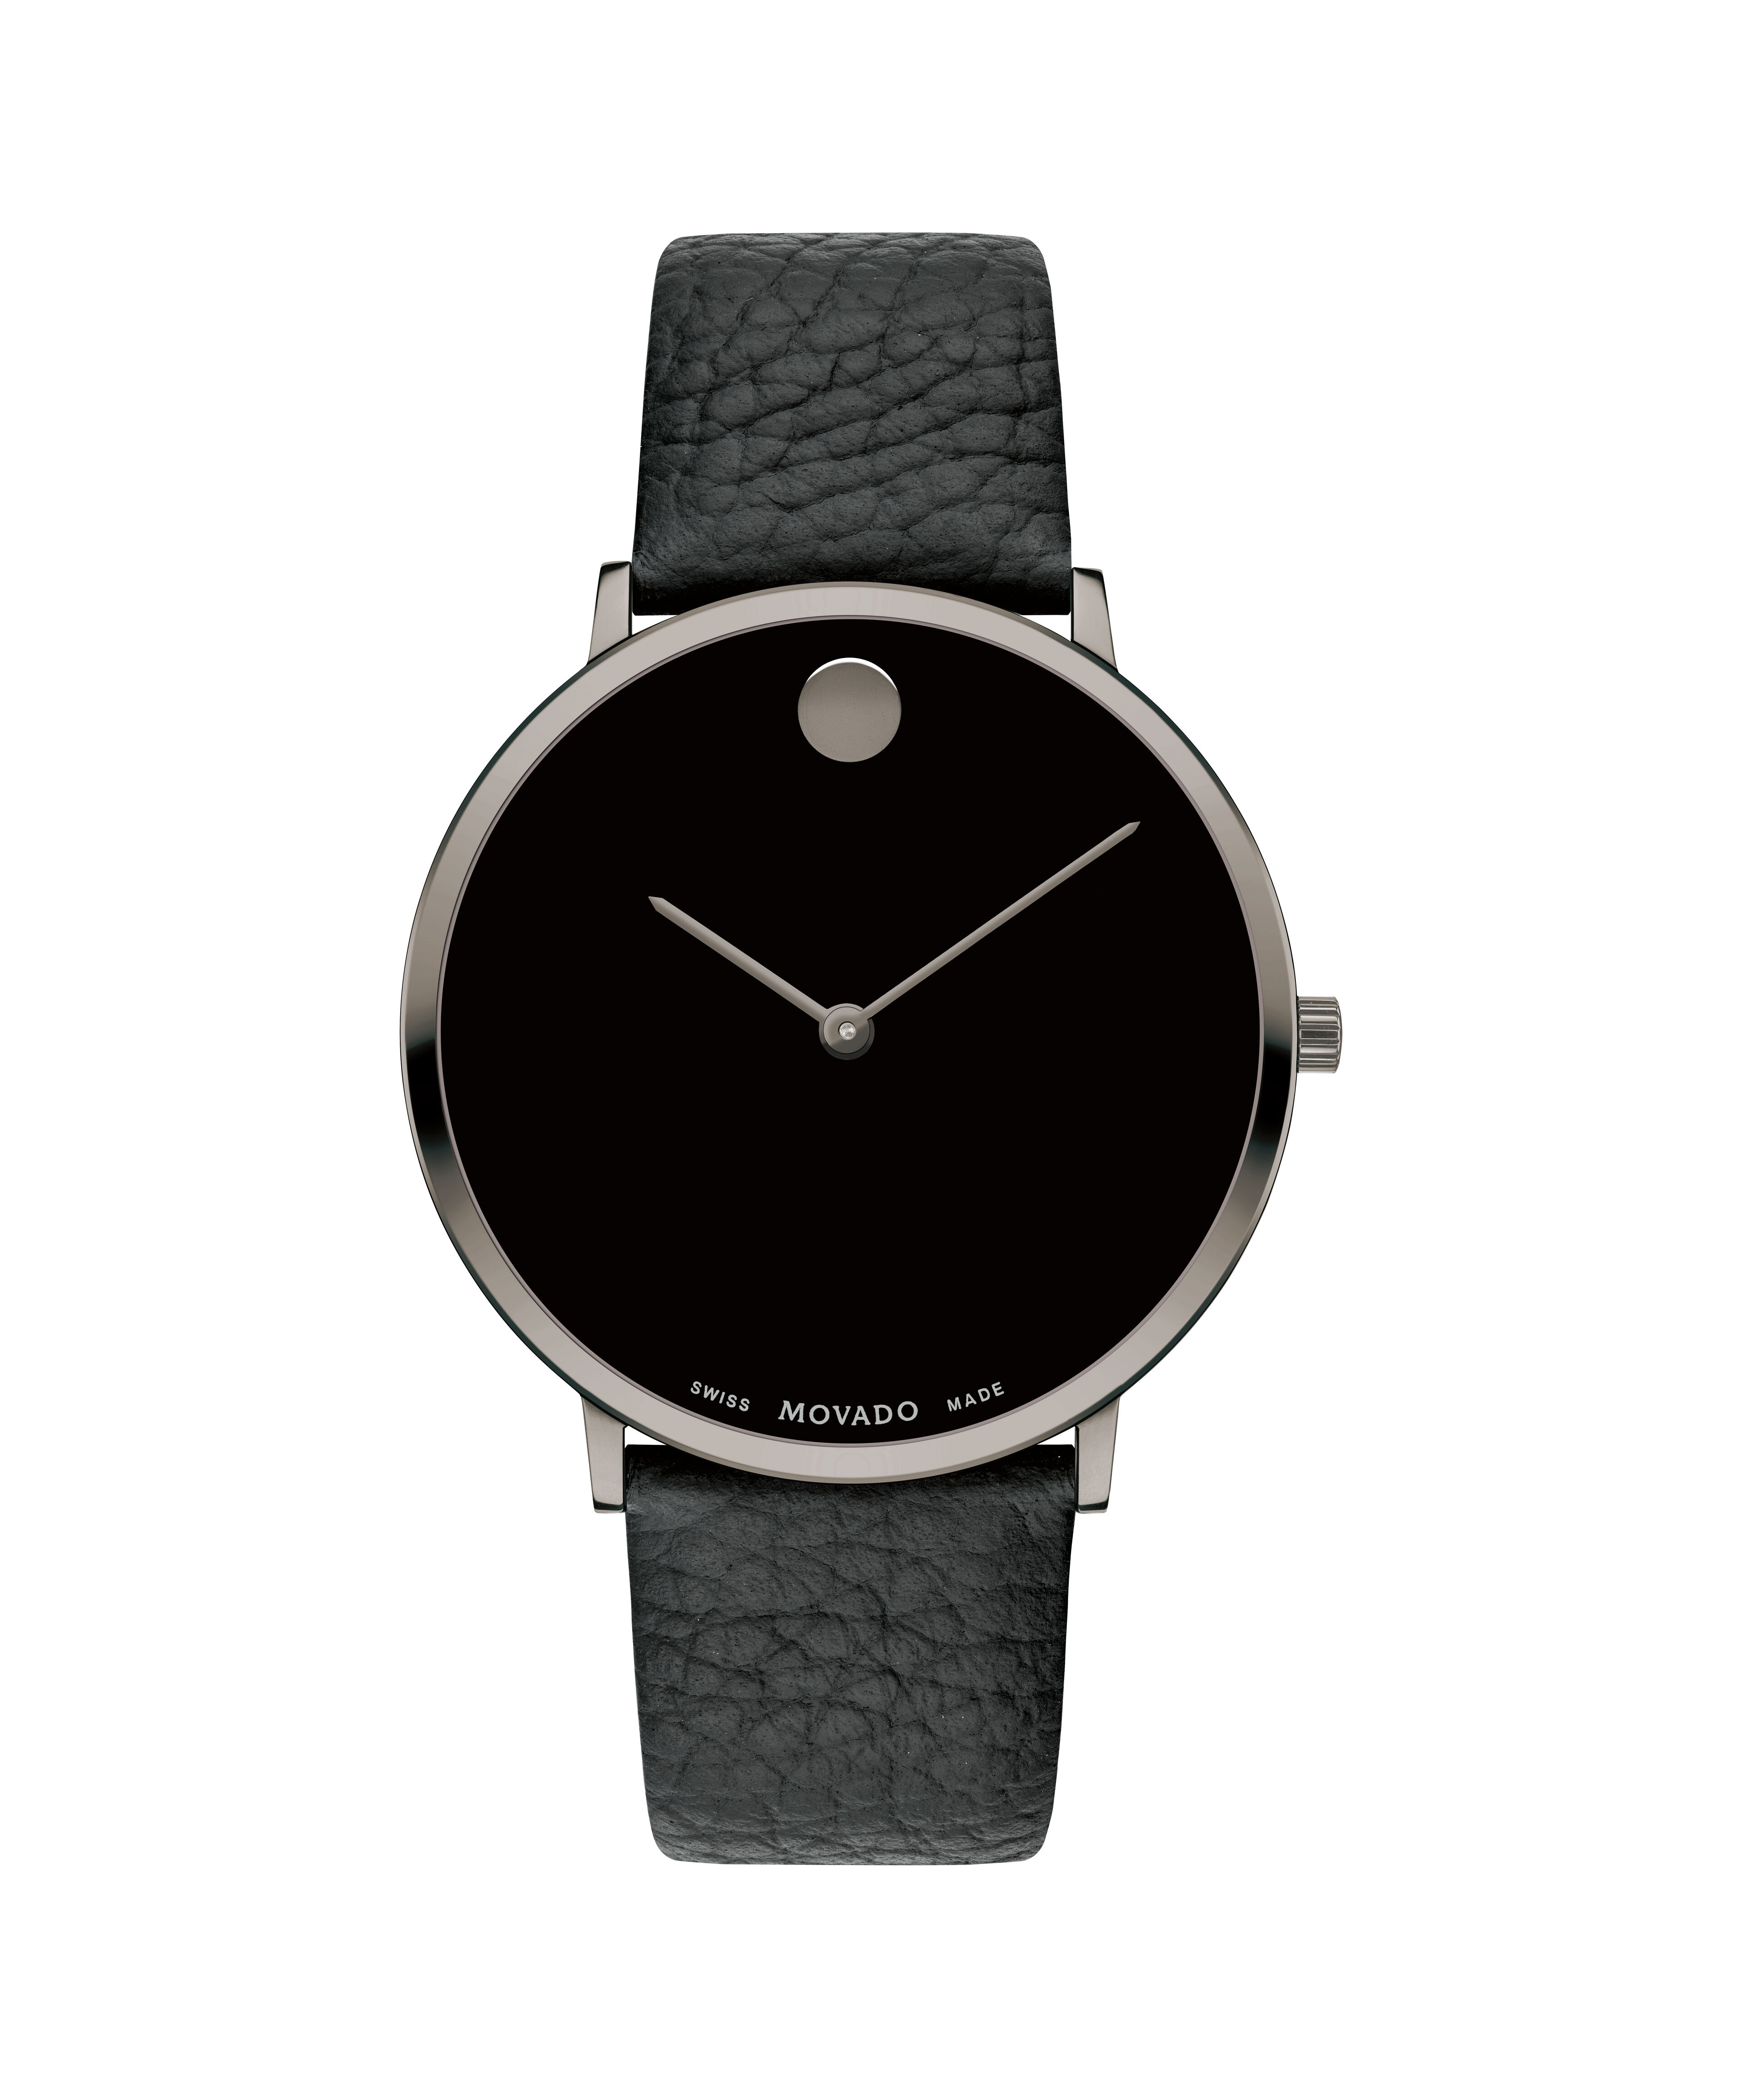 Movado Exclusive Green Dial Leather Strap Men's Watch 0607260Movado Extraplate Mécanique